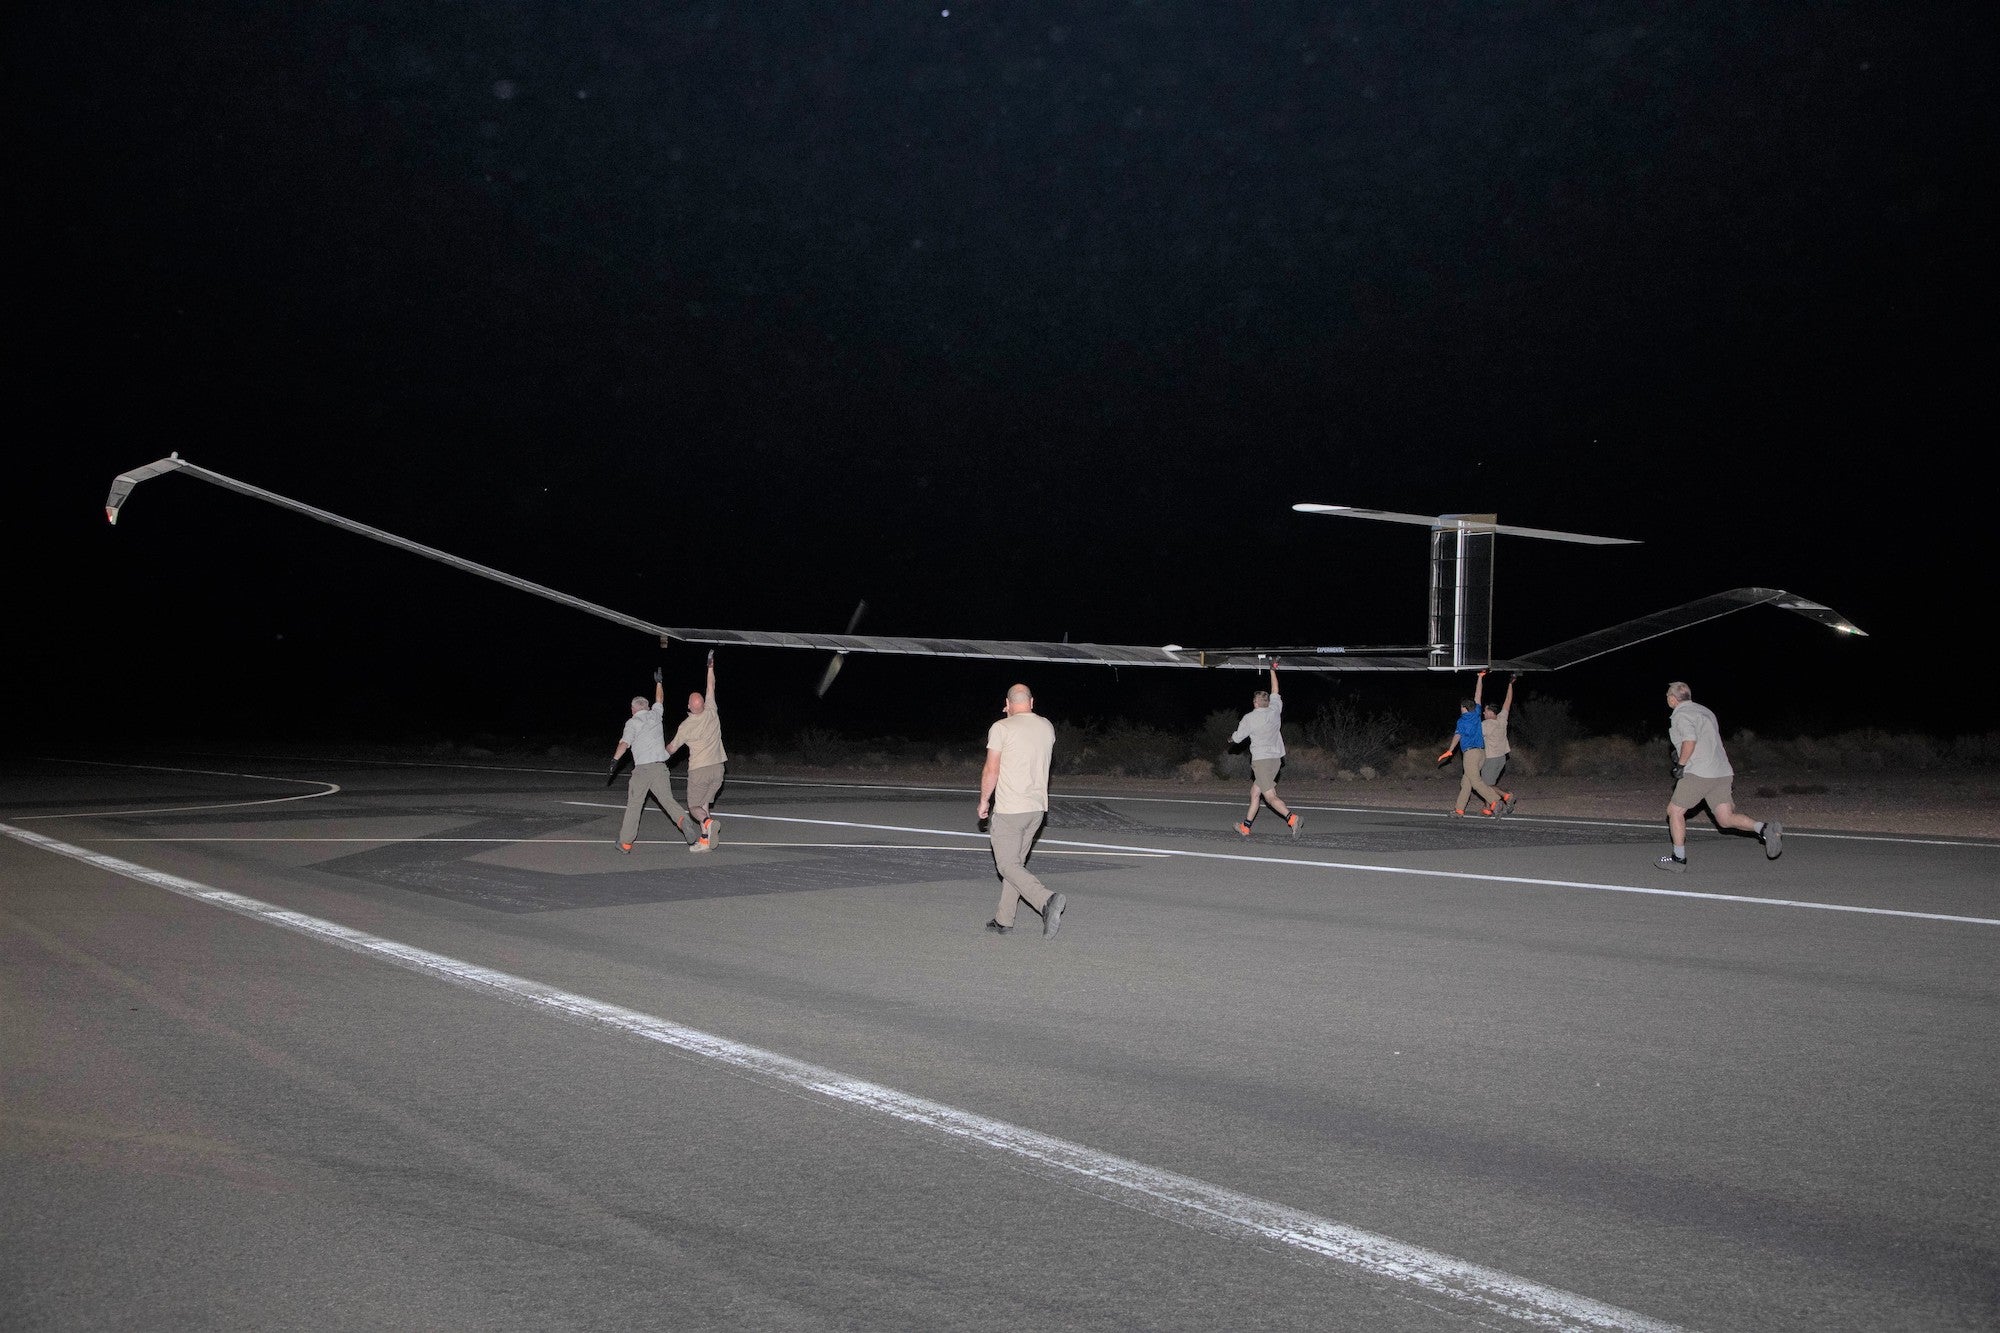 A solar-powered Army drone has been flying for 40 days straight